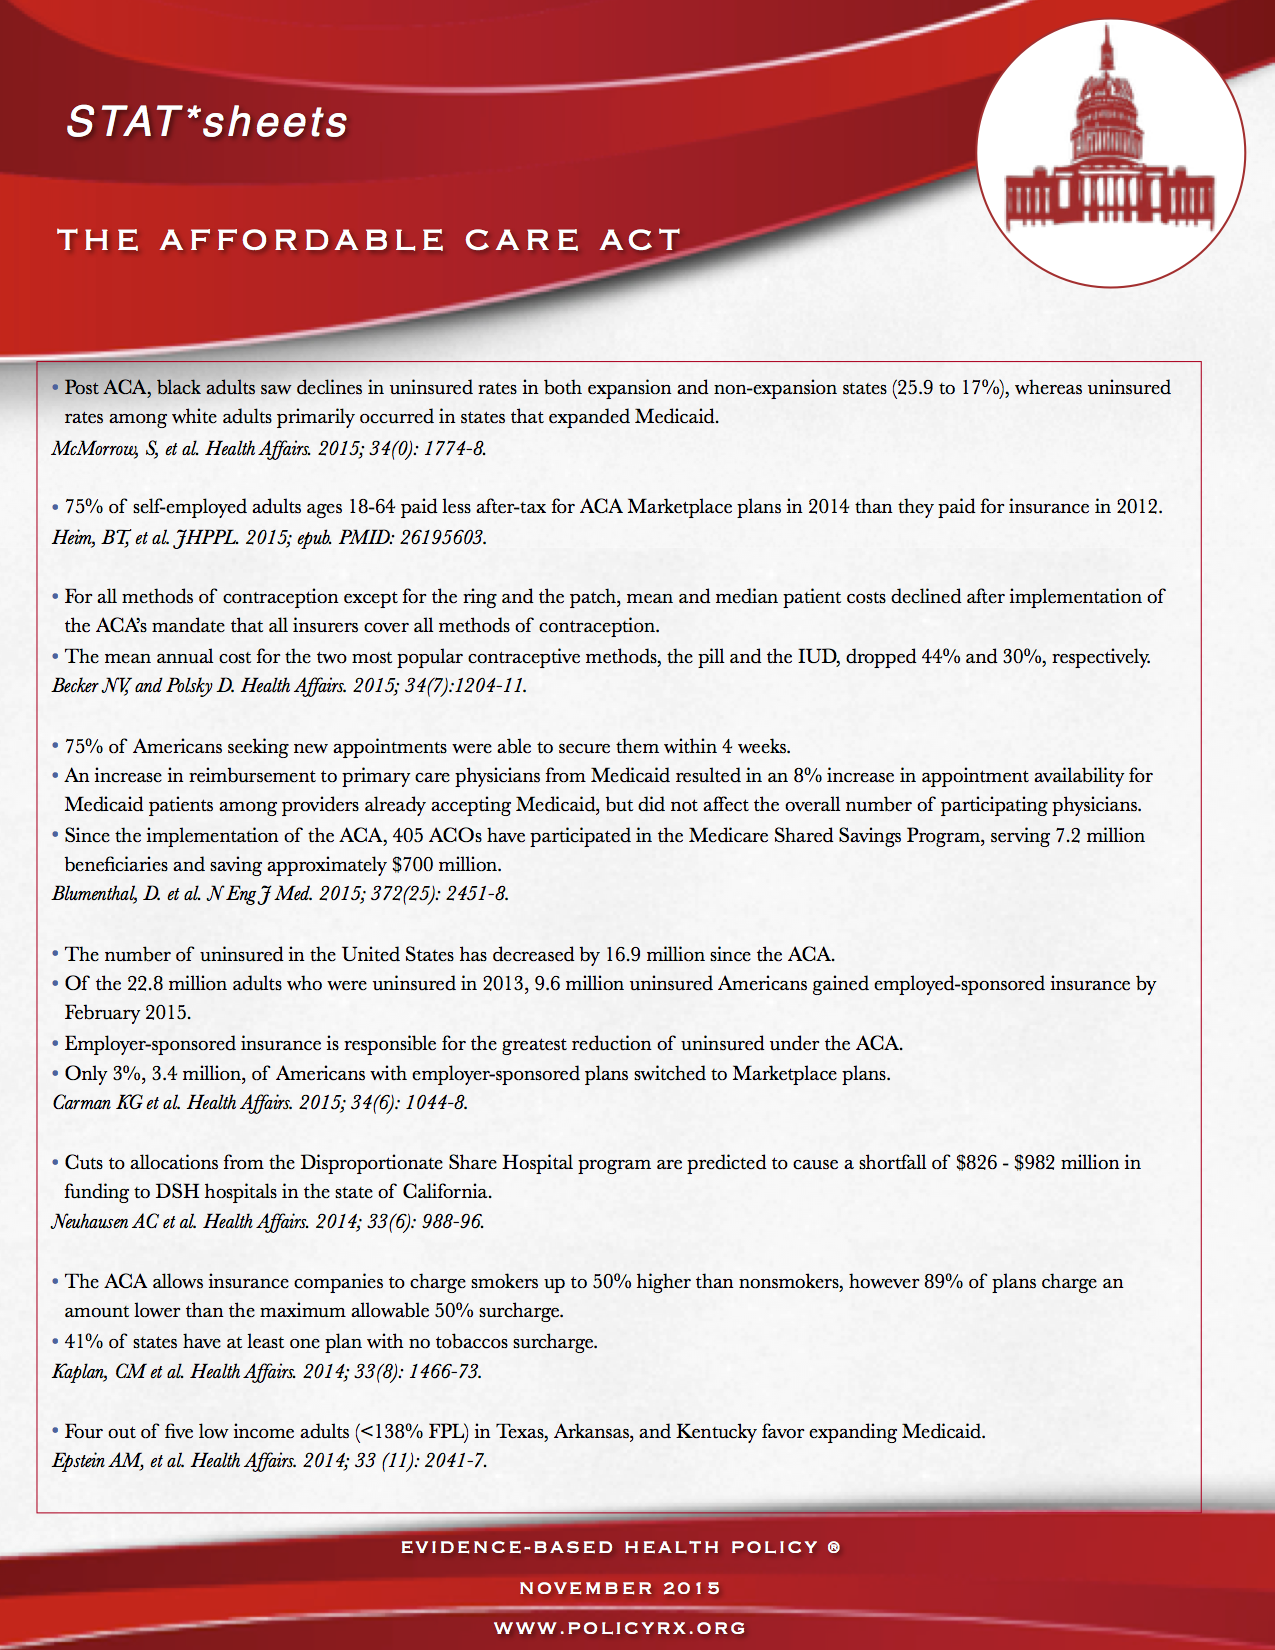 201511 The Affordable Care Act Policy Prescriptions